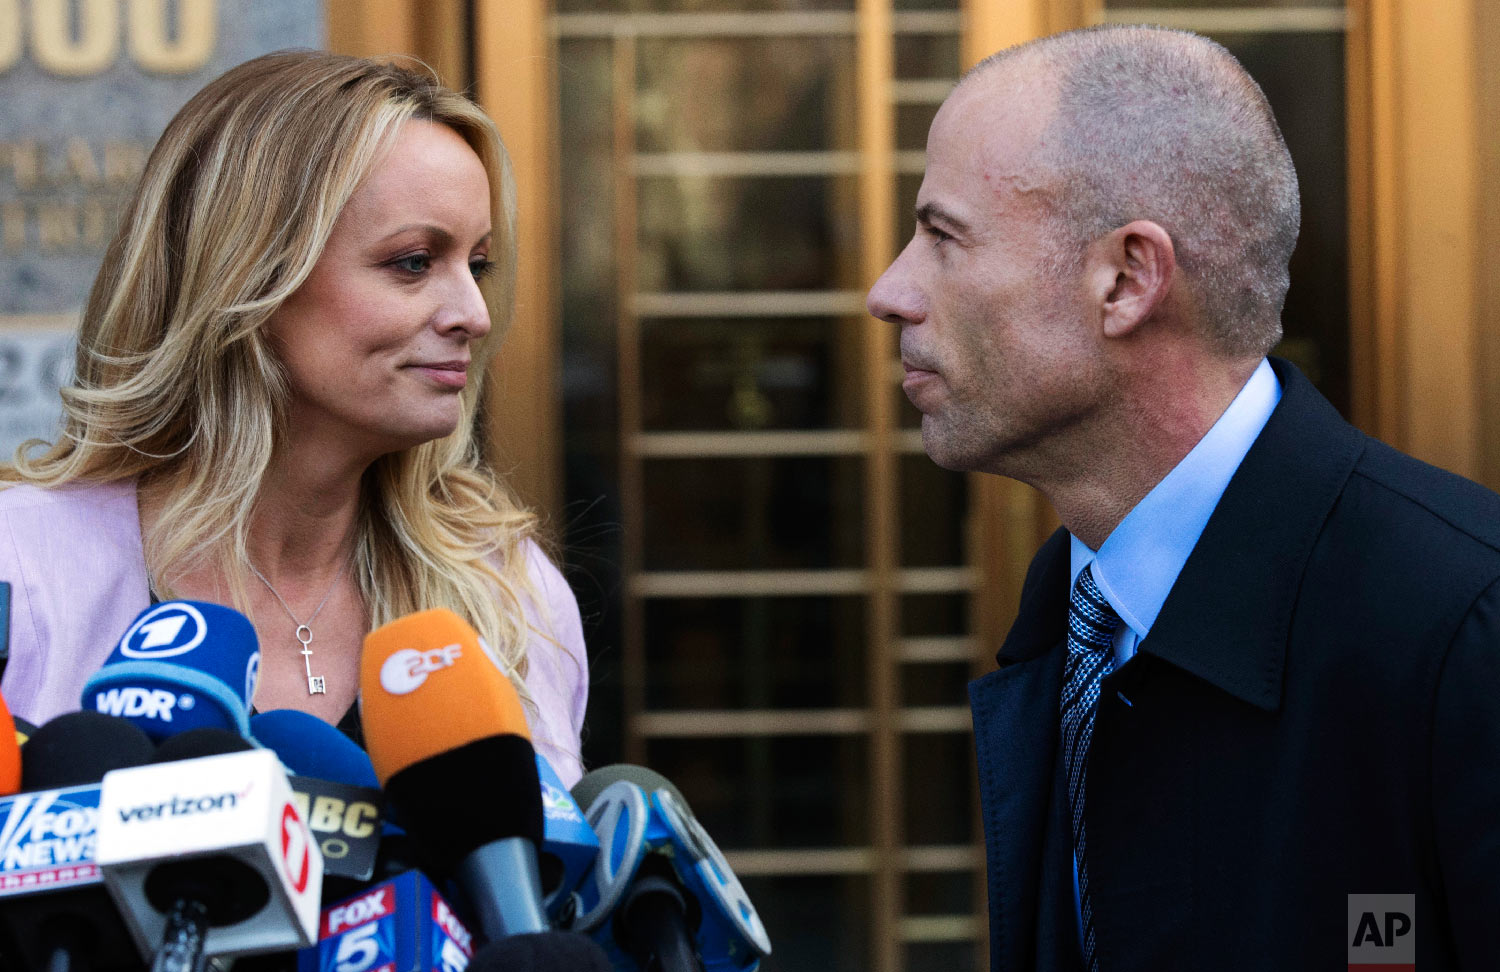  Adult film actress Stormy Daniels, left, stands with her lawyer, Michael Avenatti, after speaking outside federal court in New York on April 16, 2018. (AP Photo/Mary Altaffer) 